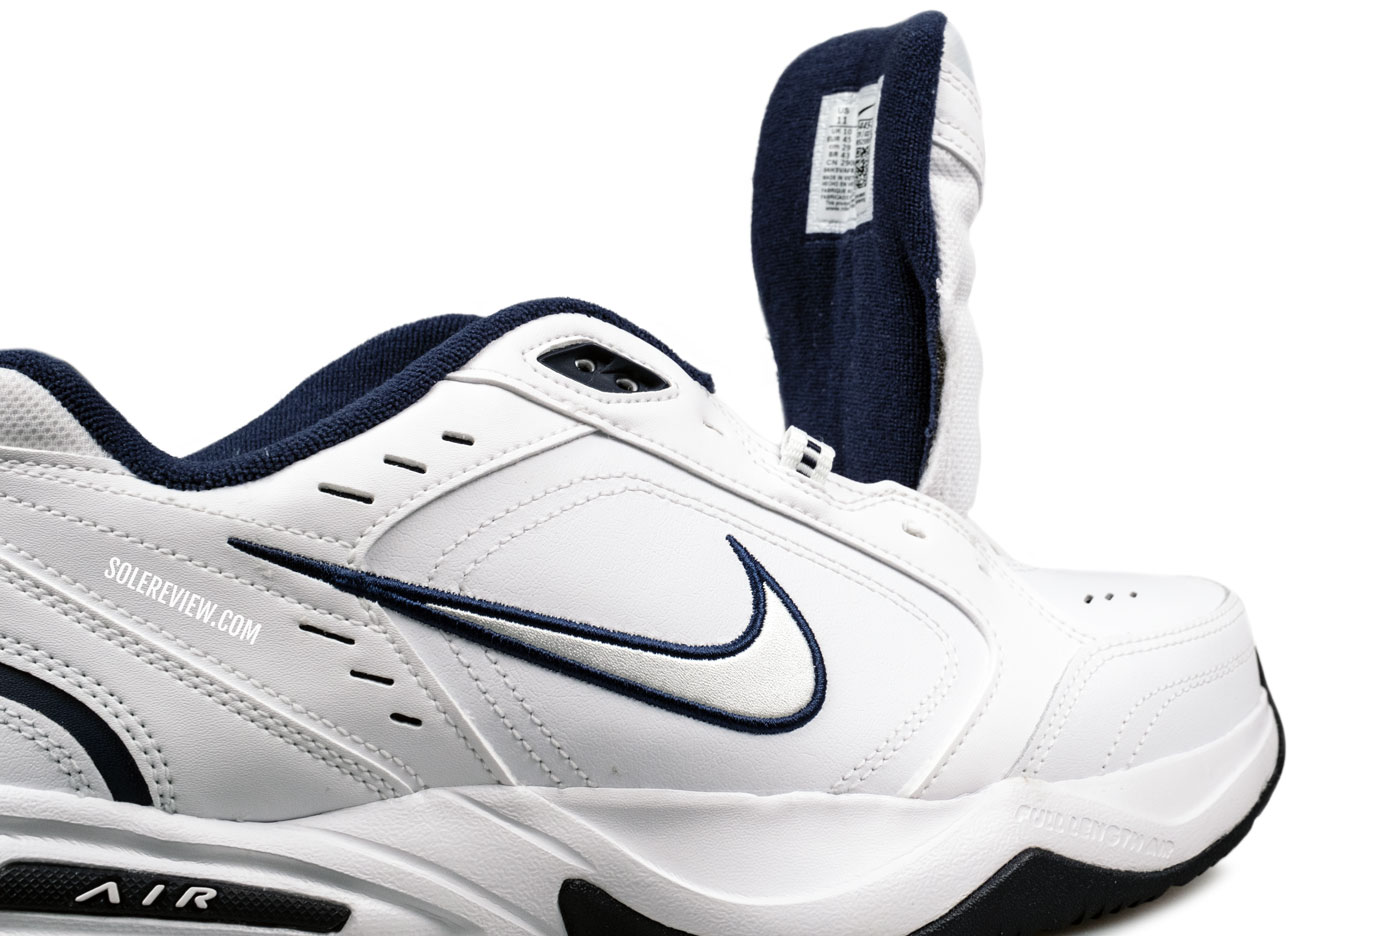 The Nike Monarch IV without a tongue sleeve.